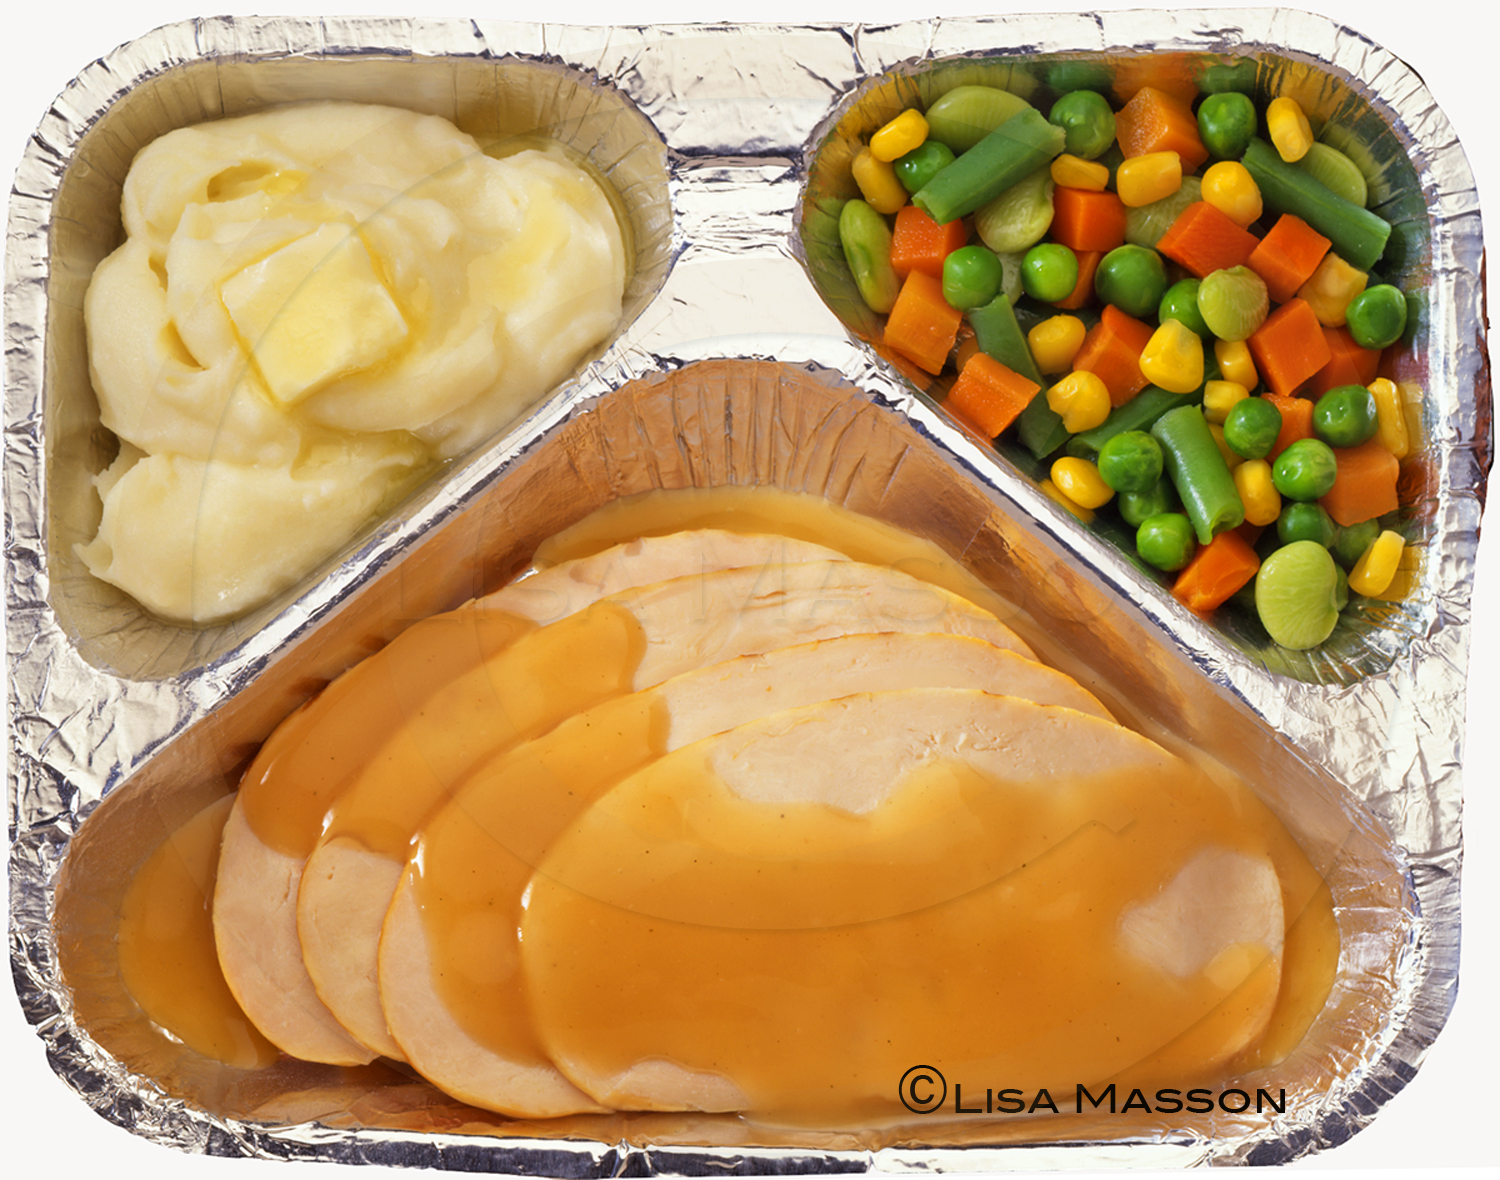 Old Fashion Turkey TV Dinner with Mashed Potatoes and Mixed Vegetables- Pat Marshall Design